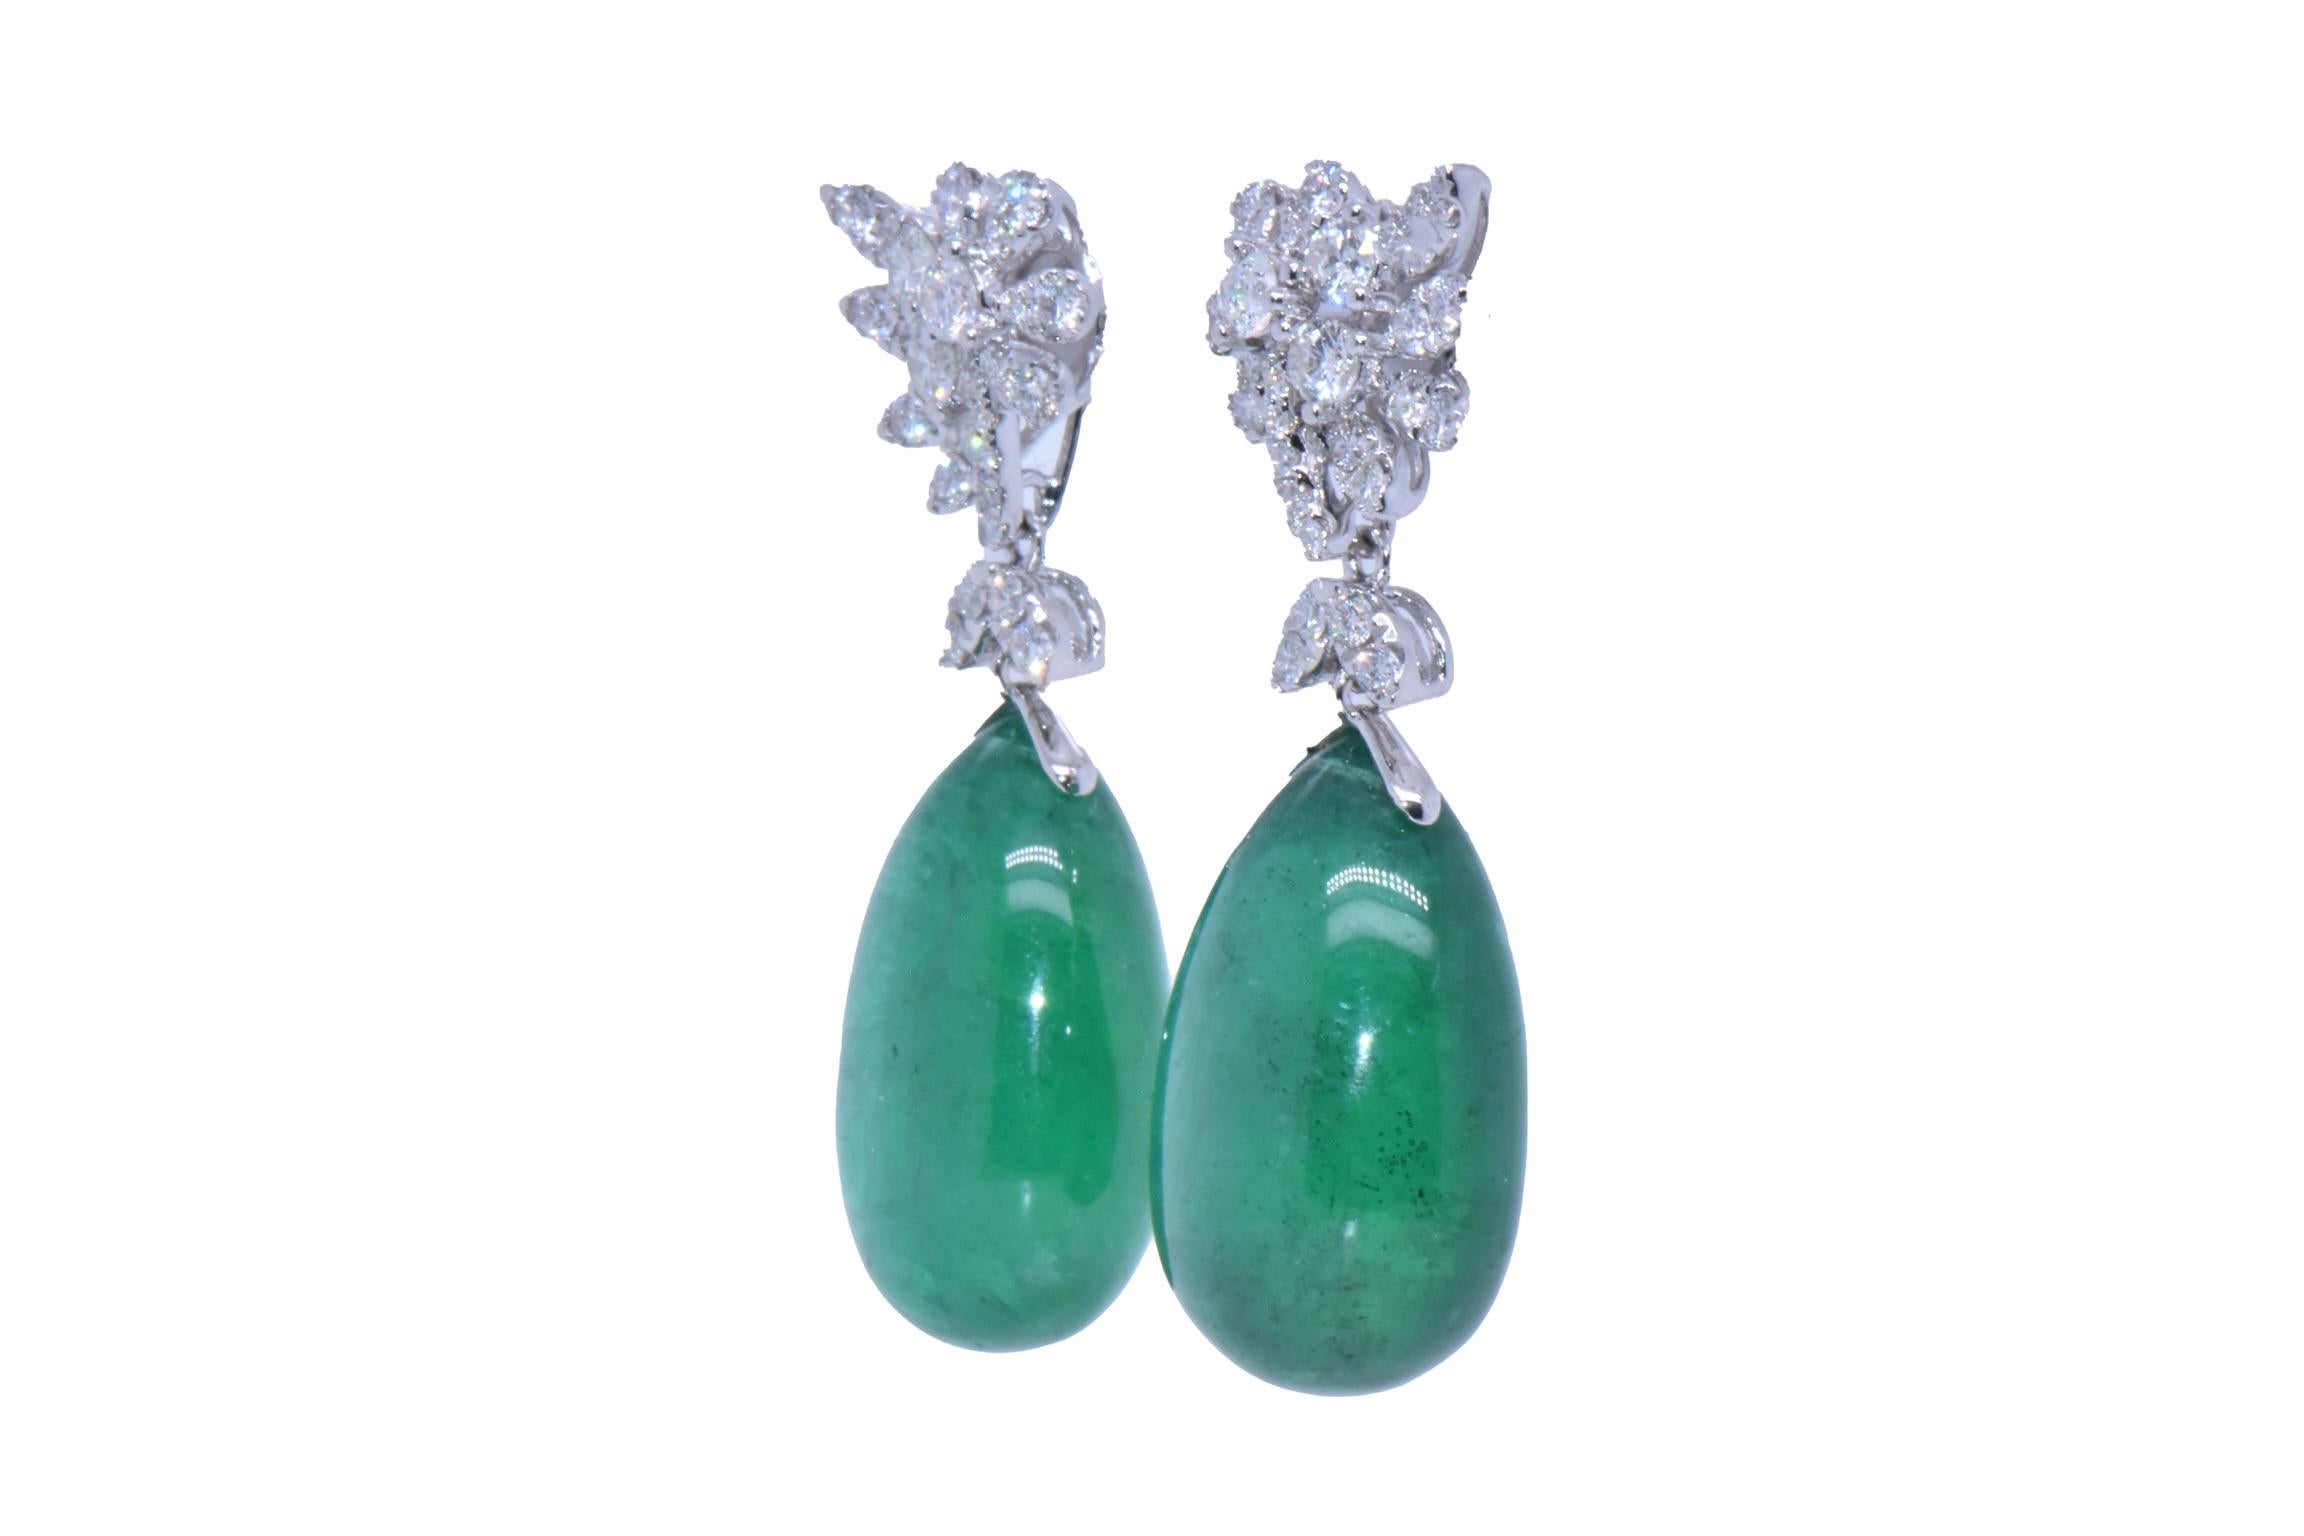 47.41 Carat Emerald Drop Earrings with Diamond Flower Design in 18k White Gold
Stunning Natural Emerald Drop Earrings Comprising of Two Pear Cabochon-Cut Natural Emeralds weighing 47.41 Carats. Excellent deep green color. The earrings are also